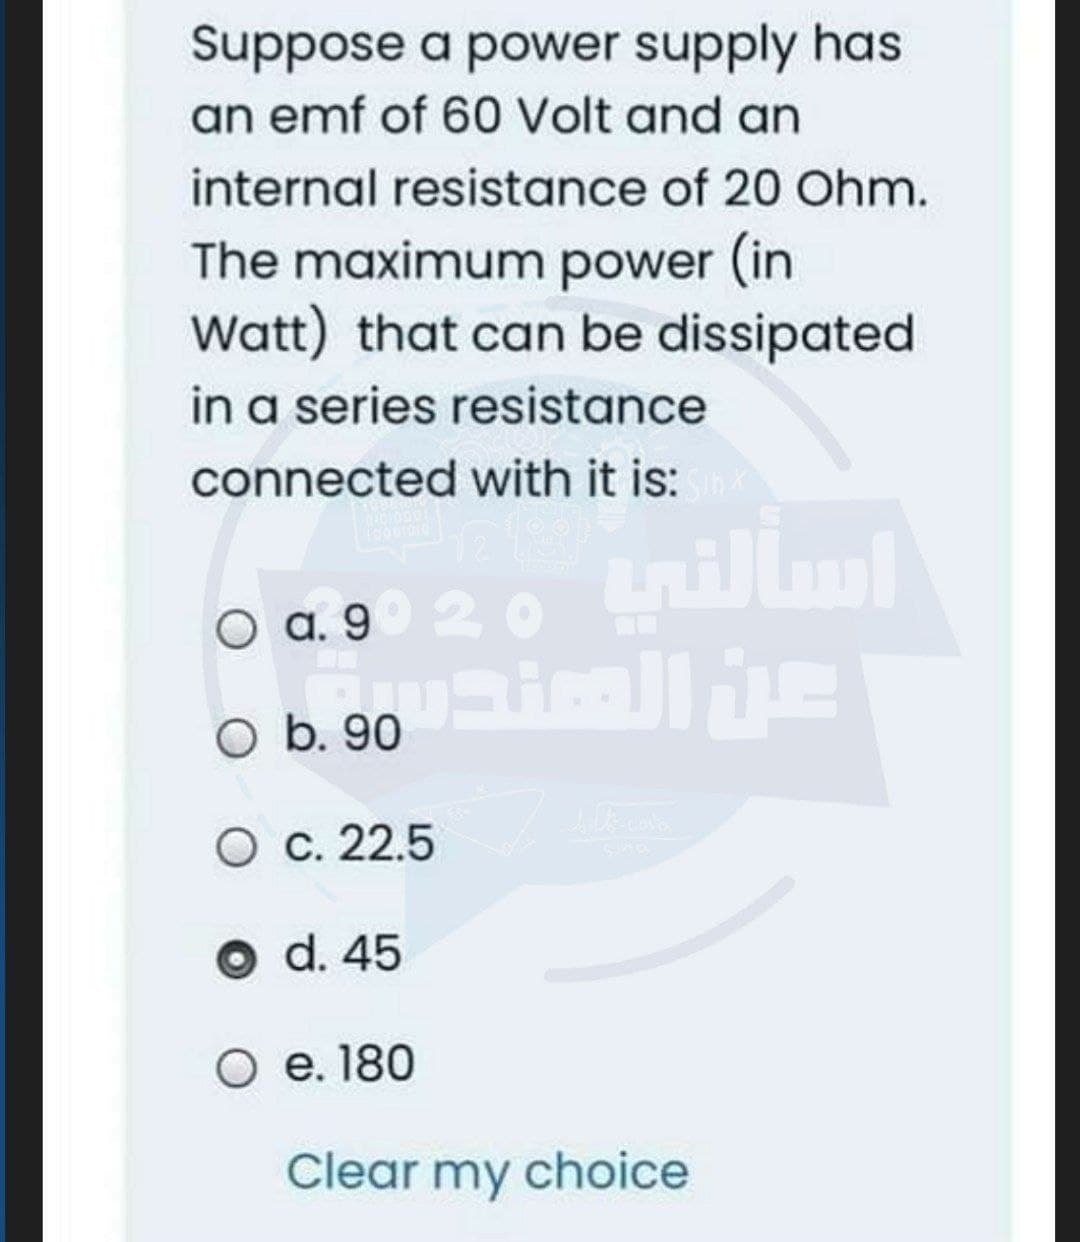 Suppose a power supply has
an emf of 60 Volt and an
internal resistance of 20 Ohm.
The maximum power (in
Watt) that can be dissipated
in a series resistance
connected with it is:
O a. 9° 20 tnill
O b. 90
O c. 22.5
O d. 45
O e. 180
Clear my choice
